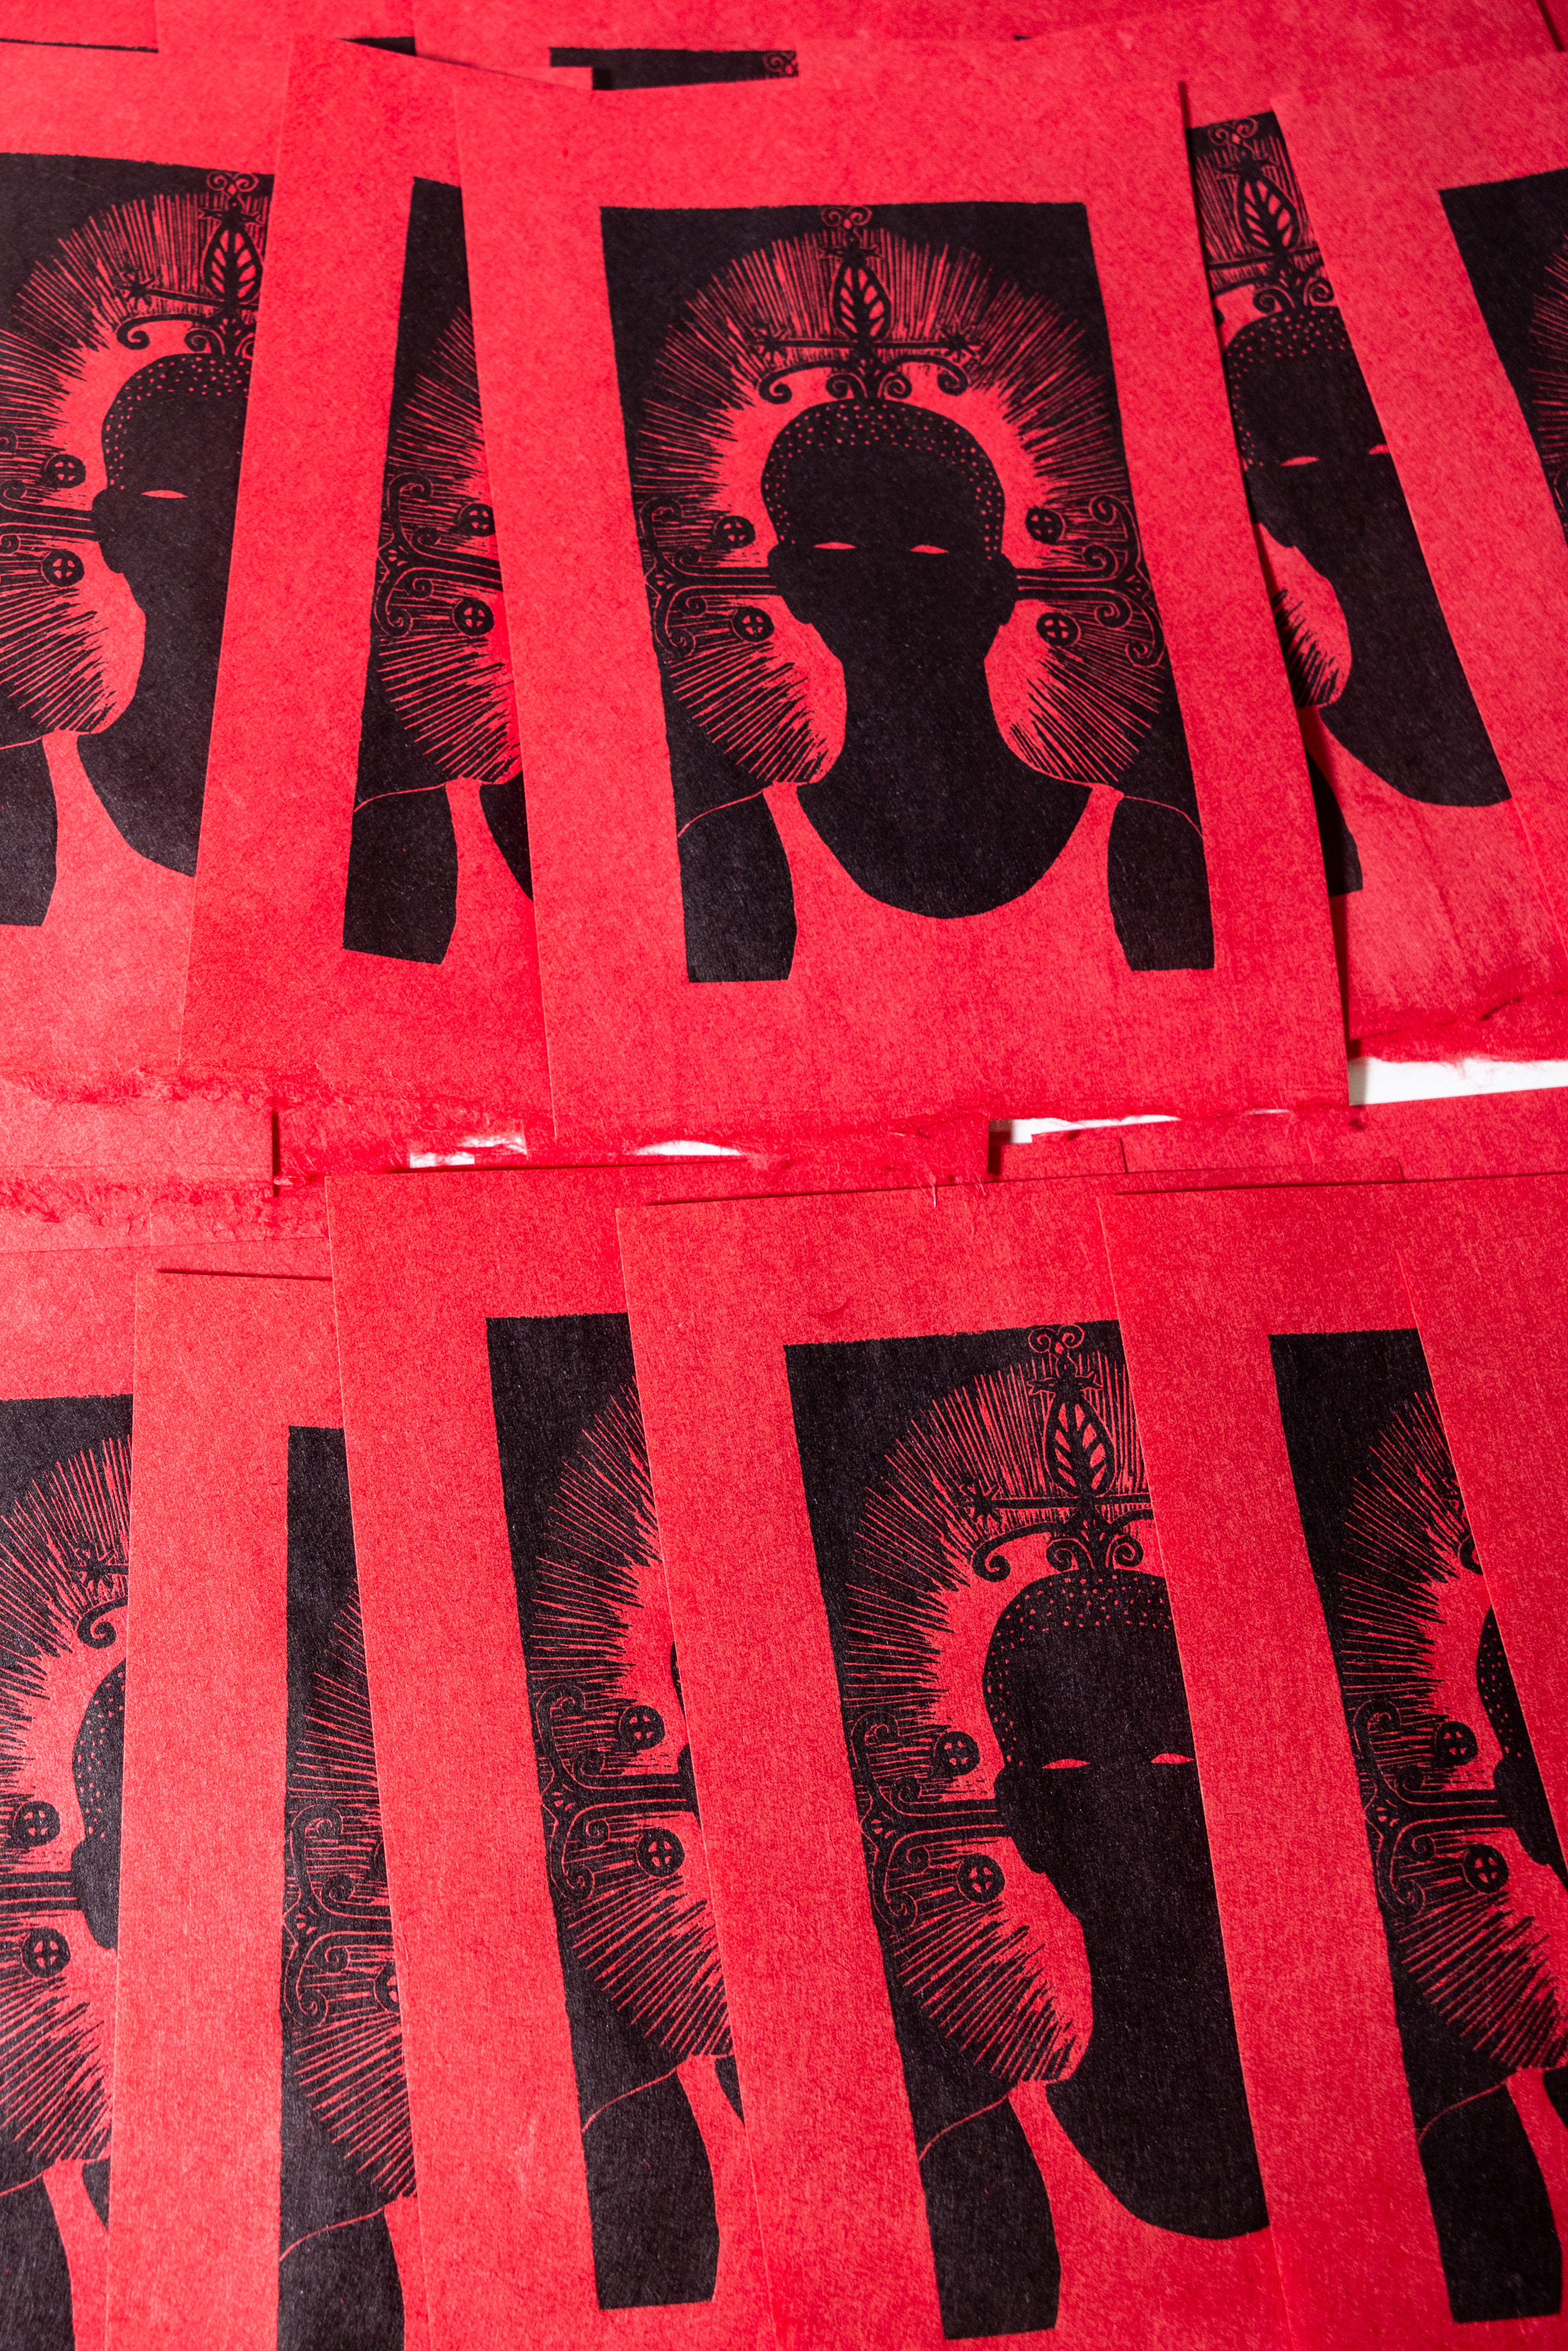 Red Chinese paper with black printed designs of a traditional Buddha face surrounded by intricate patterns. Multiple overlapping sheets visible.